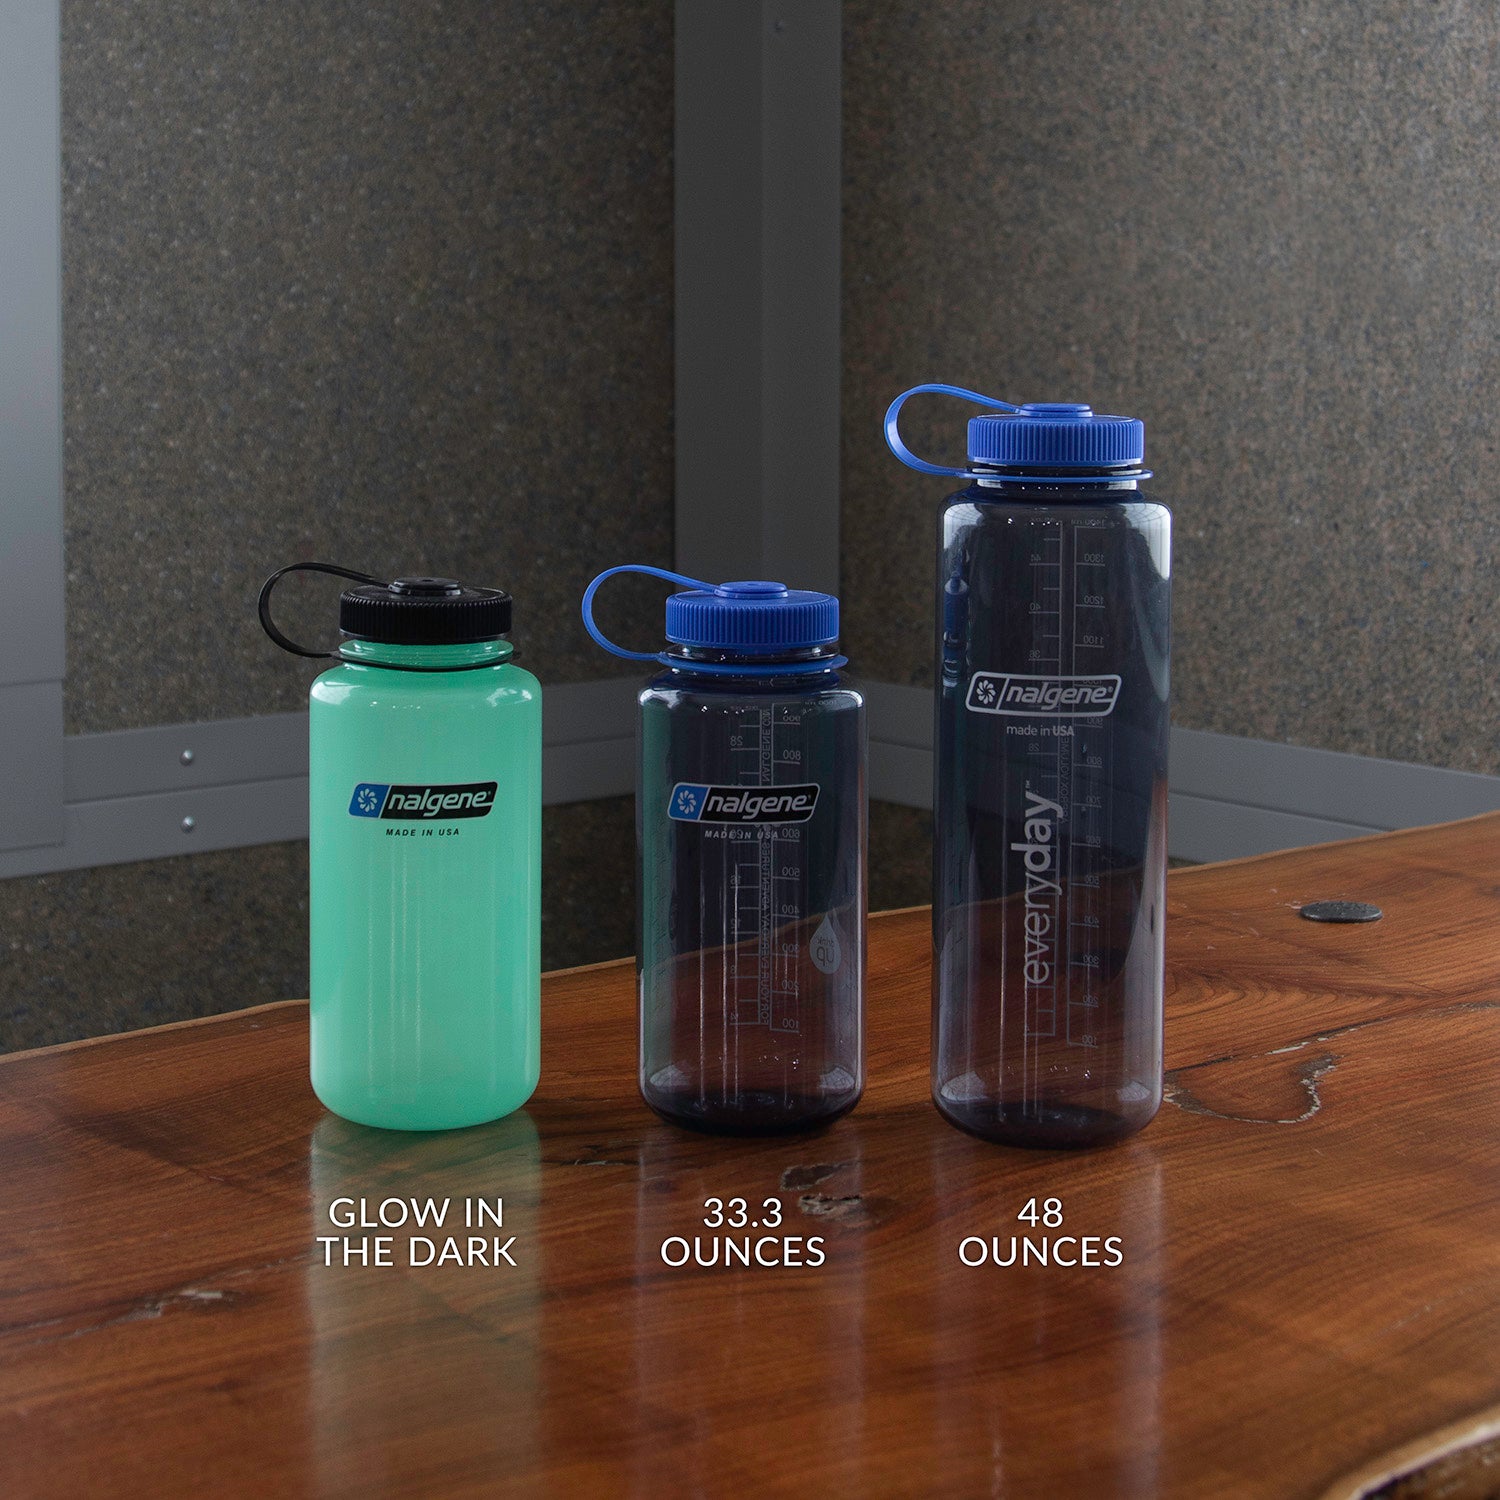 Nalgene group from left to right Glow in dark, 33.3 ounce, 48 ounce.